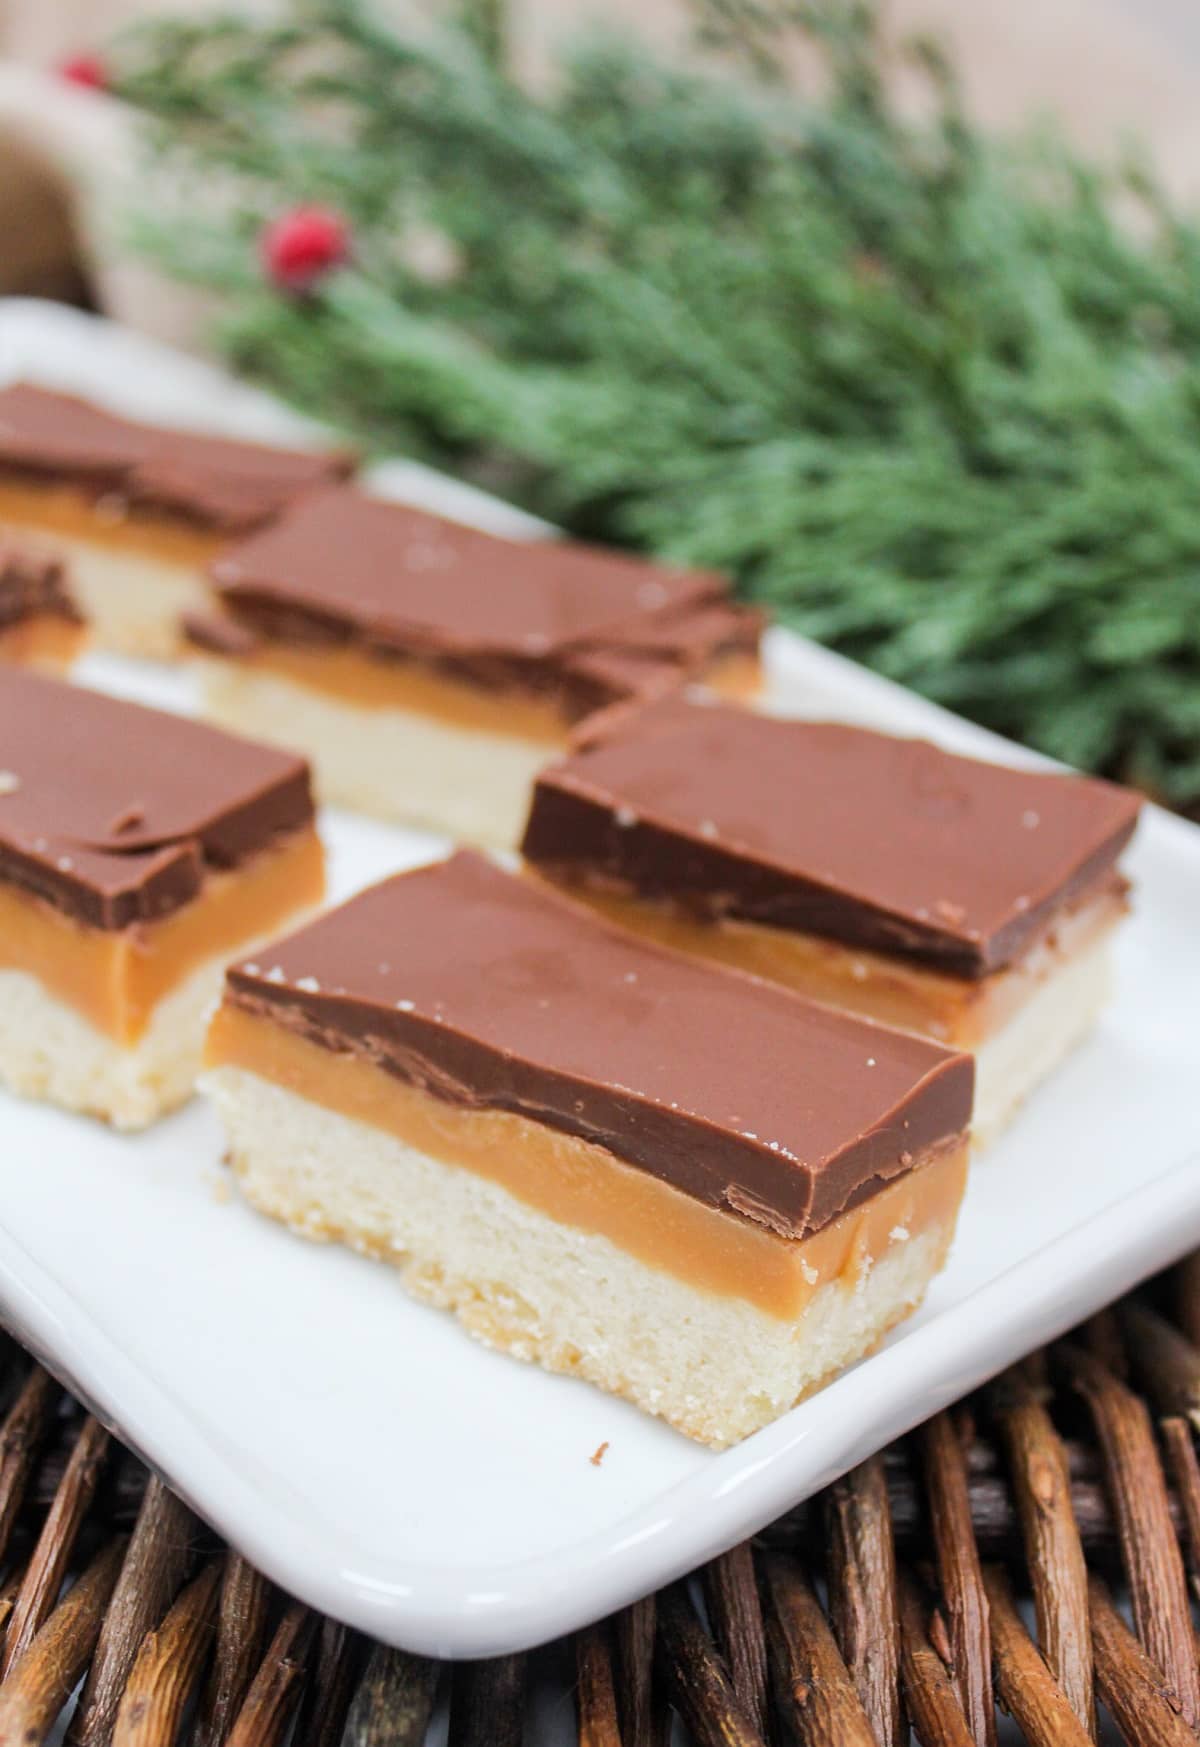 Cookie style bars cut into rectangles. The bars are layers wit h shortbread on the bottom, then caramel, and chocolate on top.